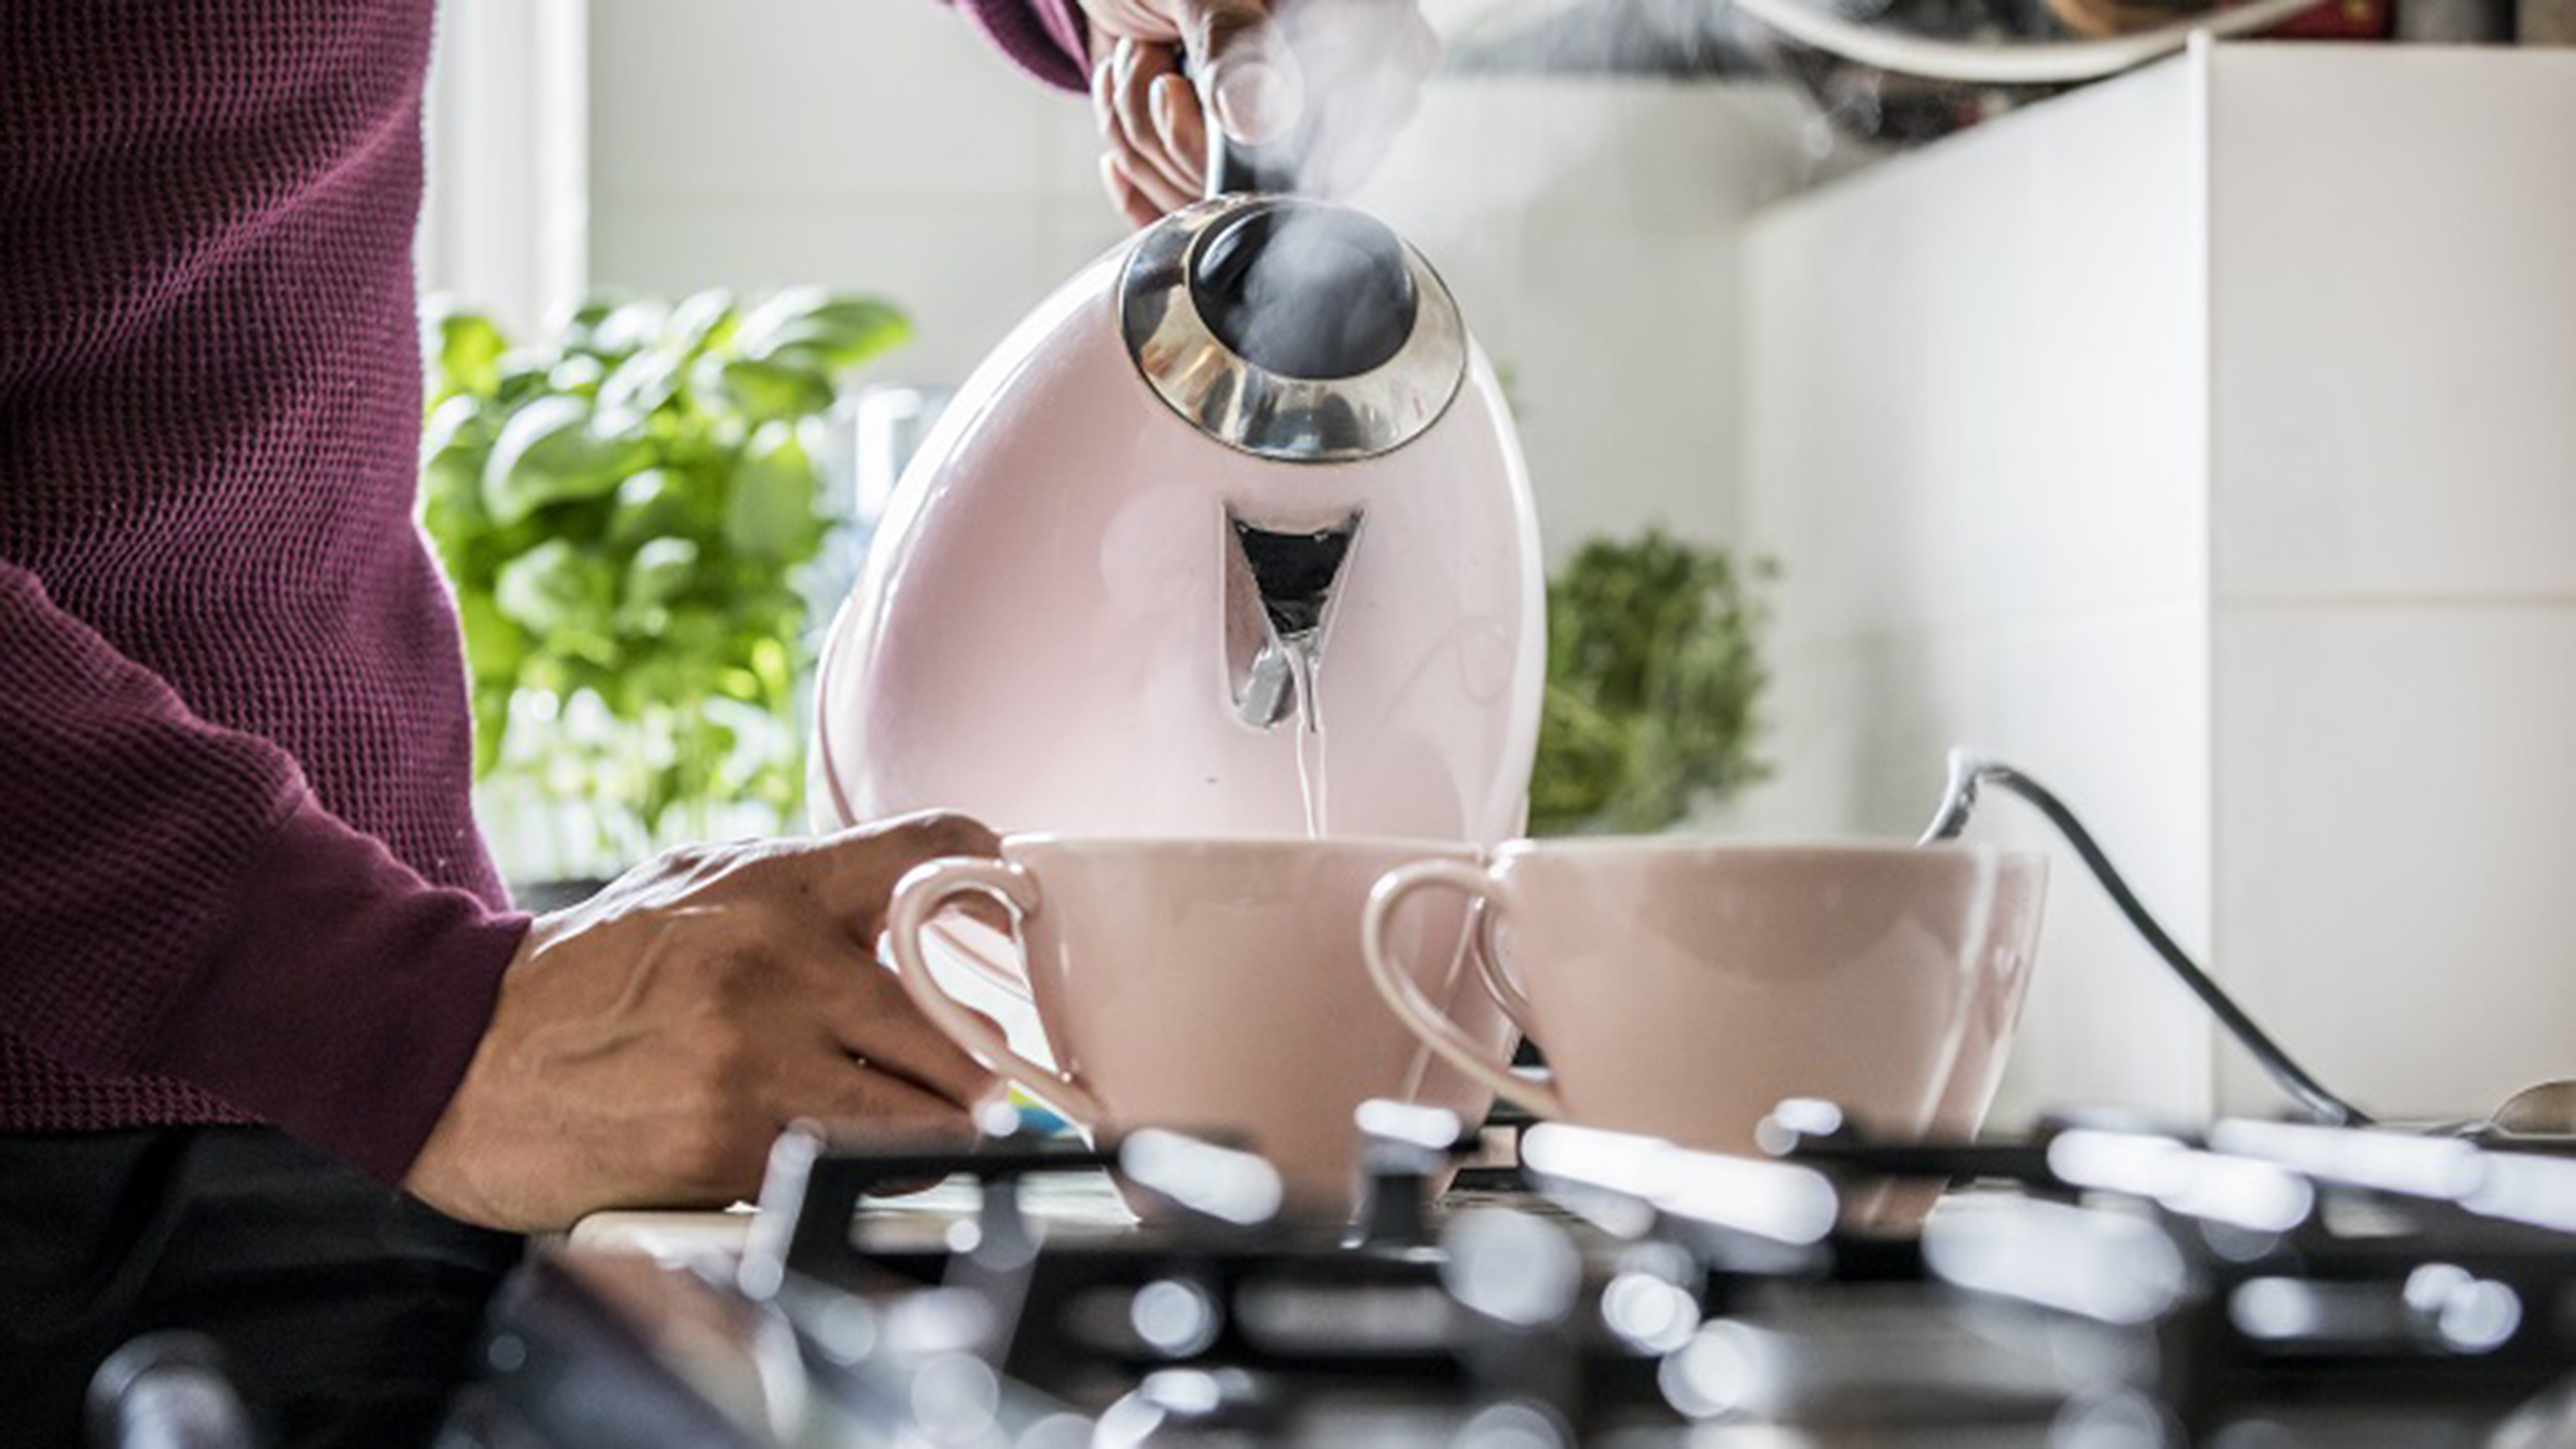 How much does it cost to boil a kettle? Here's the most efficient way to  boil water